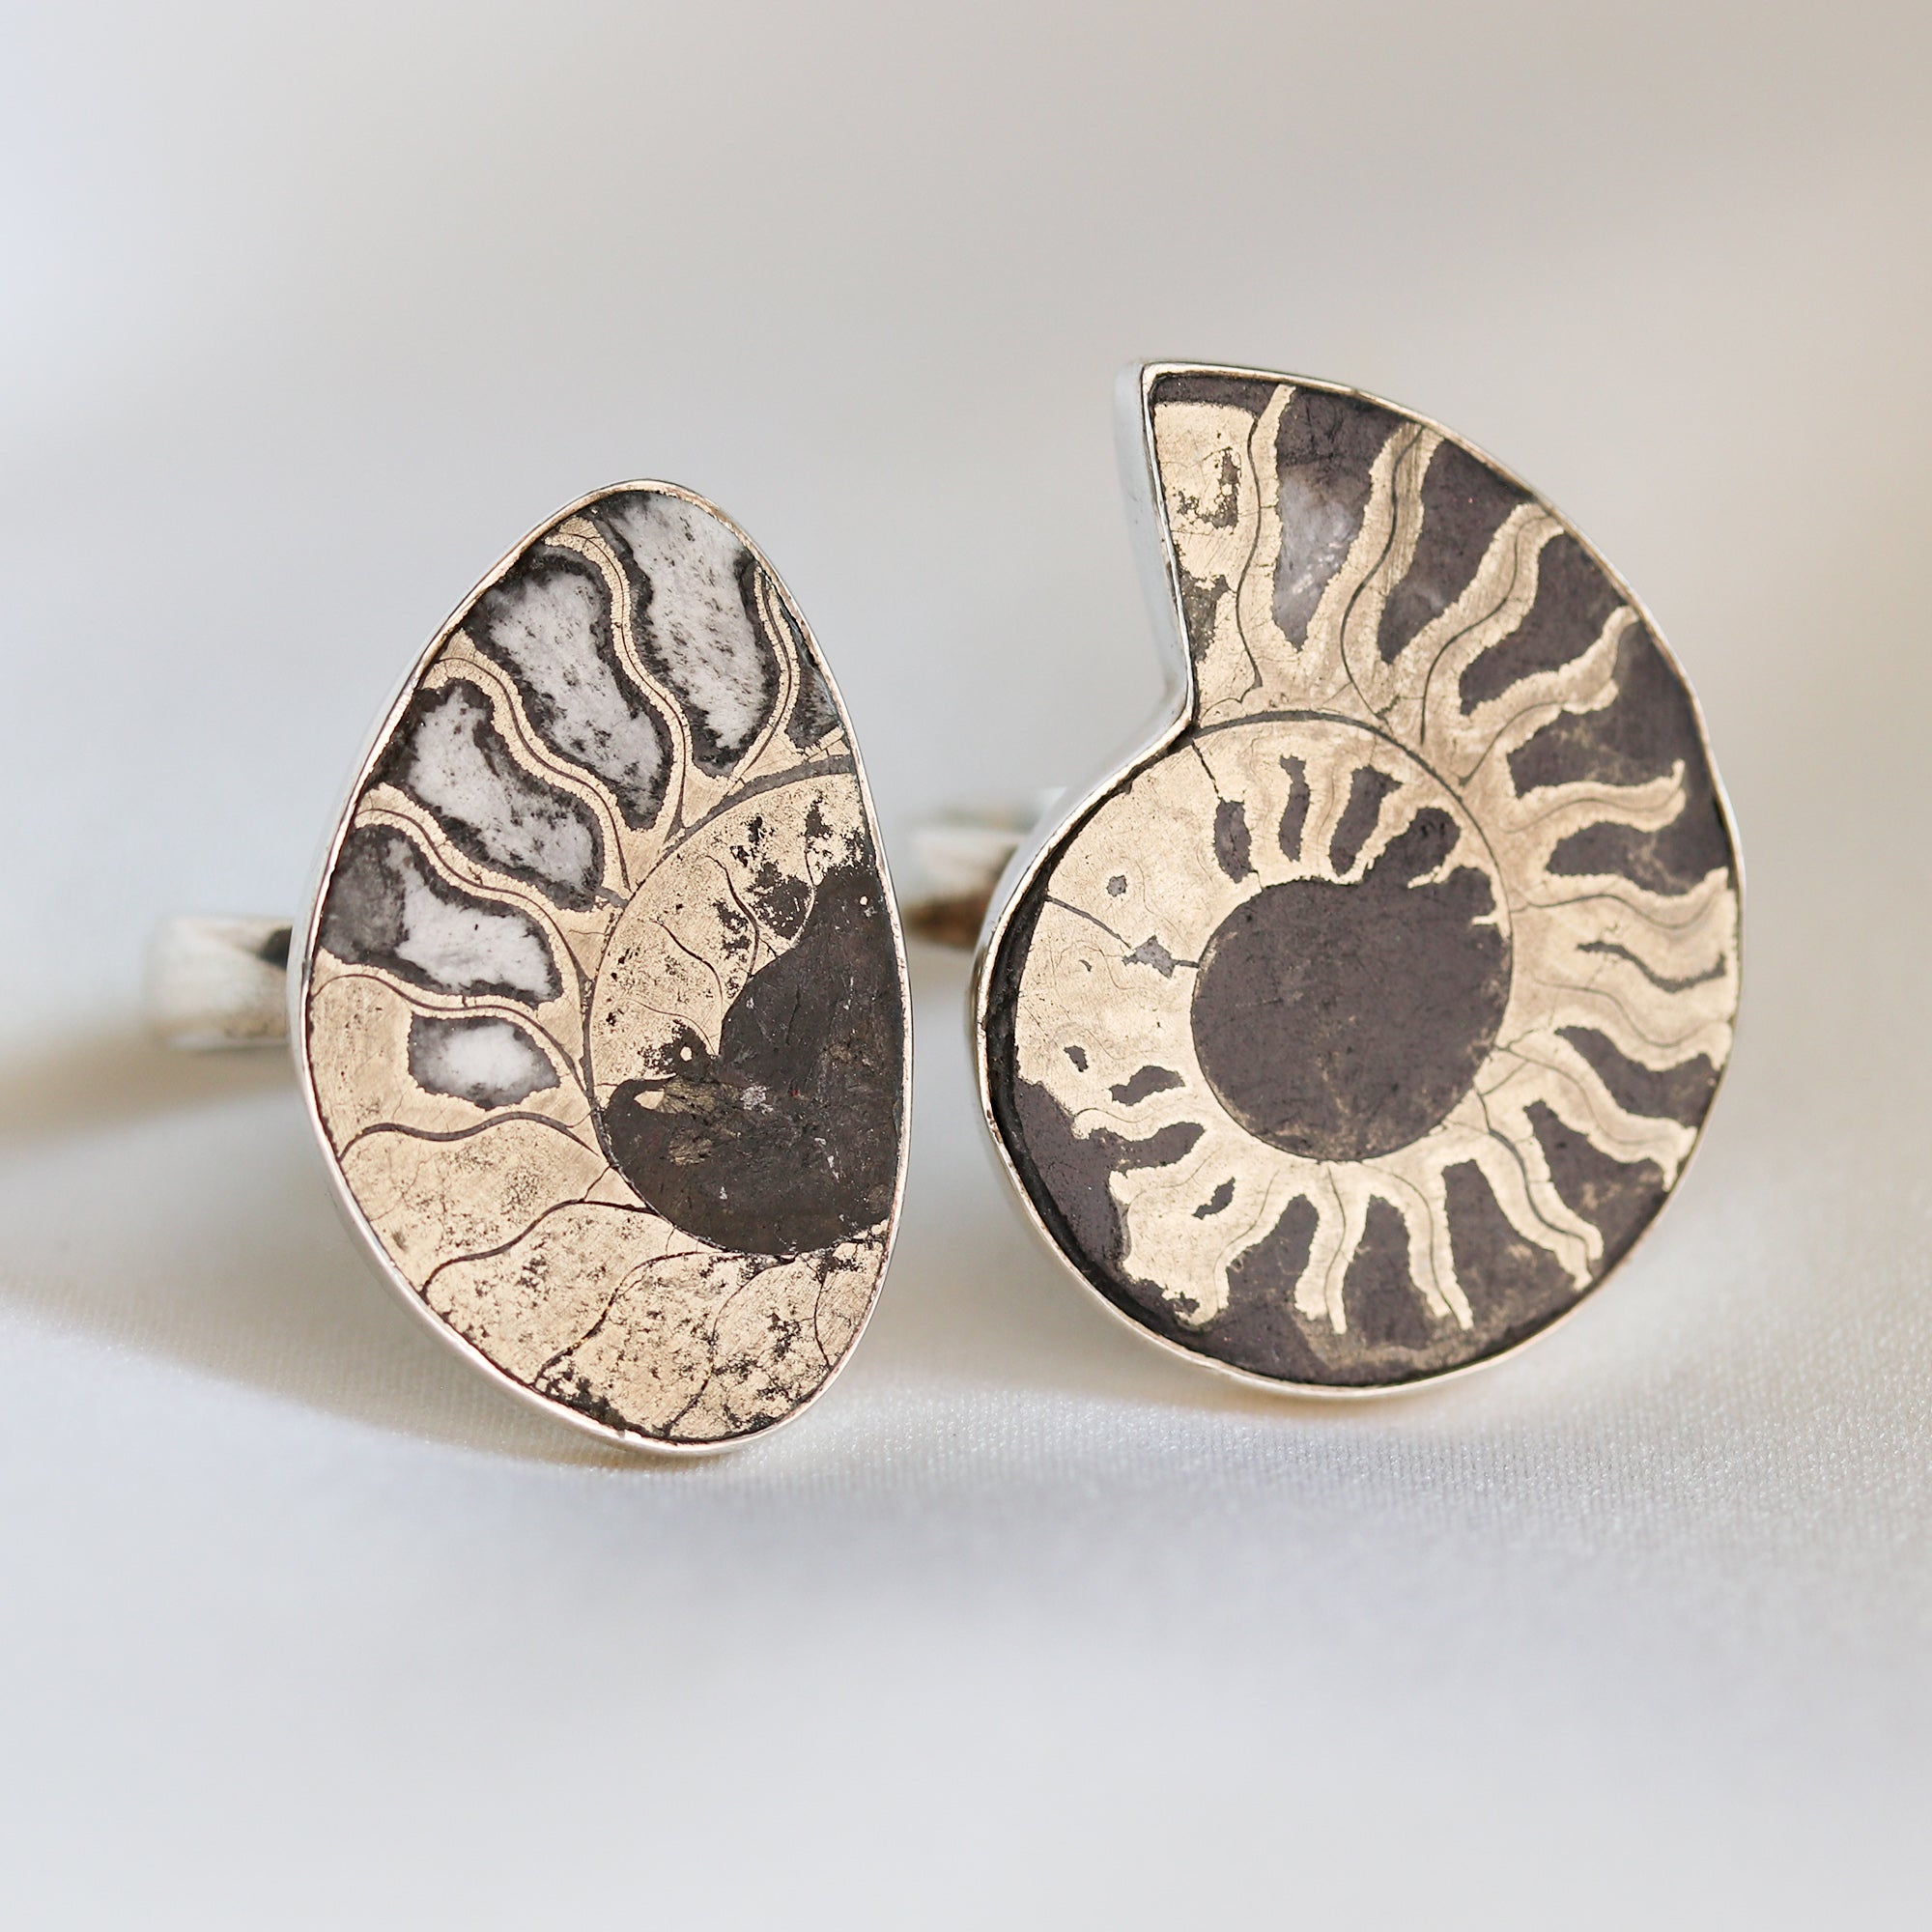 metal ammonite fossil ring 925 sterling silver